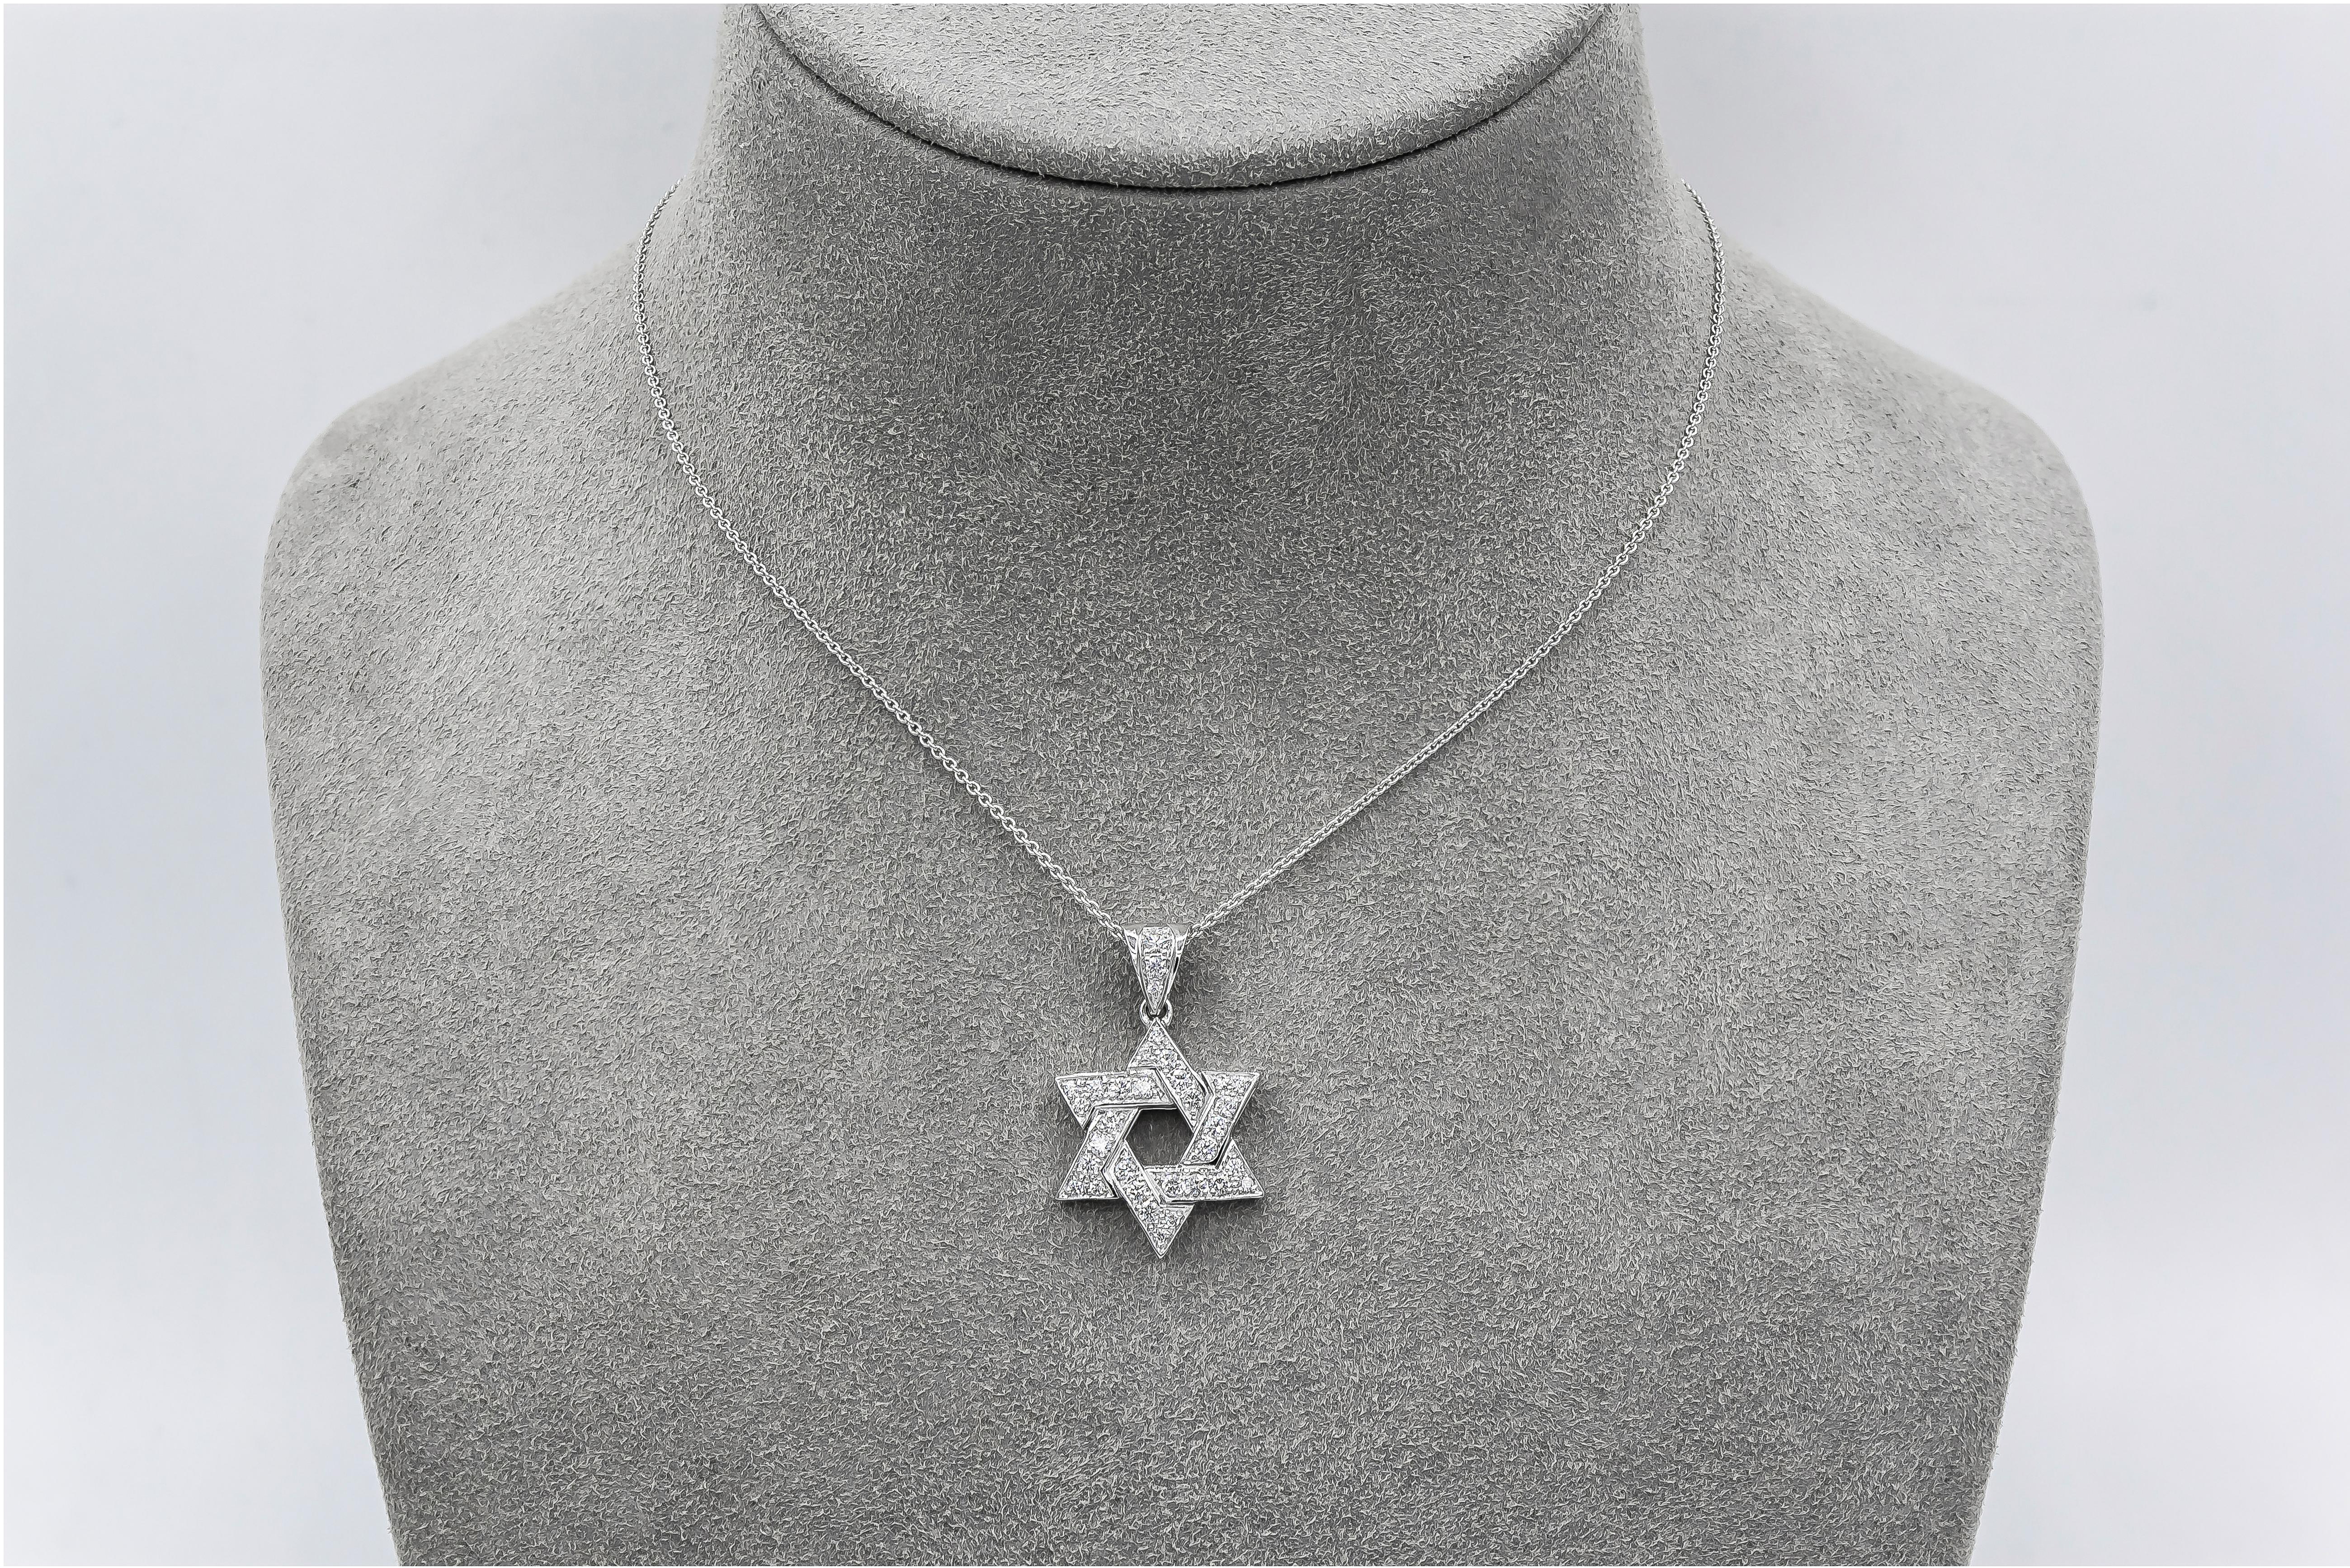 A traditional star of david pendant encrusted with round brilliant diamonds weighing 0.58 carats total. Made in 18k white gold. 

Style available in different price ranges. Prices are based on your selection. Please contact us for more information.  